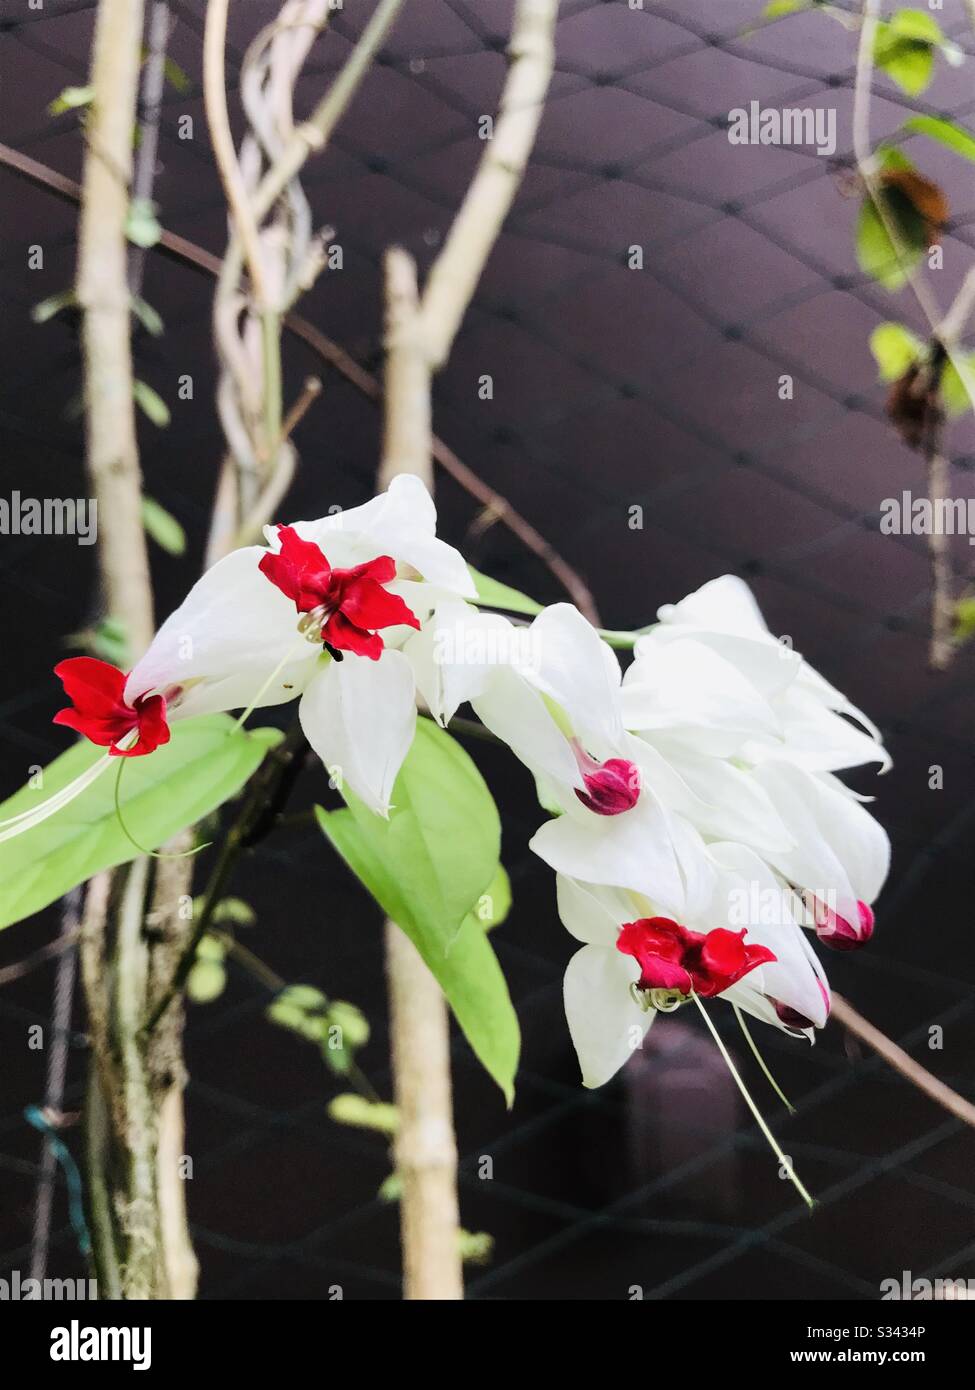 Clerodendrum thomsoniae aka Bleeding Heart vine found in Singapore Zoo garden- white & red flower- bunch of tiny flowers in single stalk- flower’s facing down Stock Photo